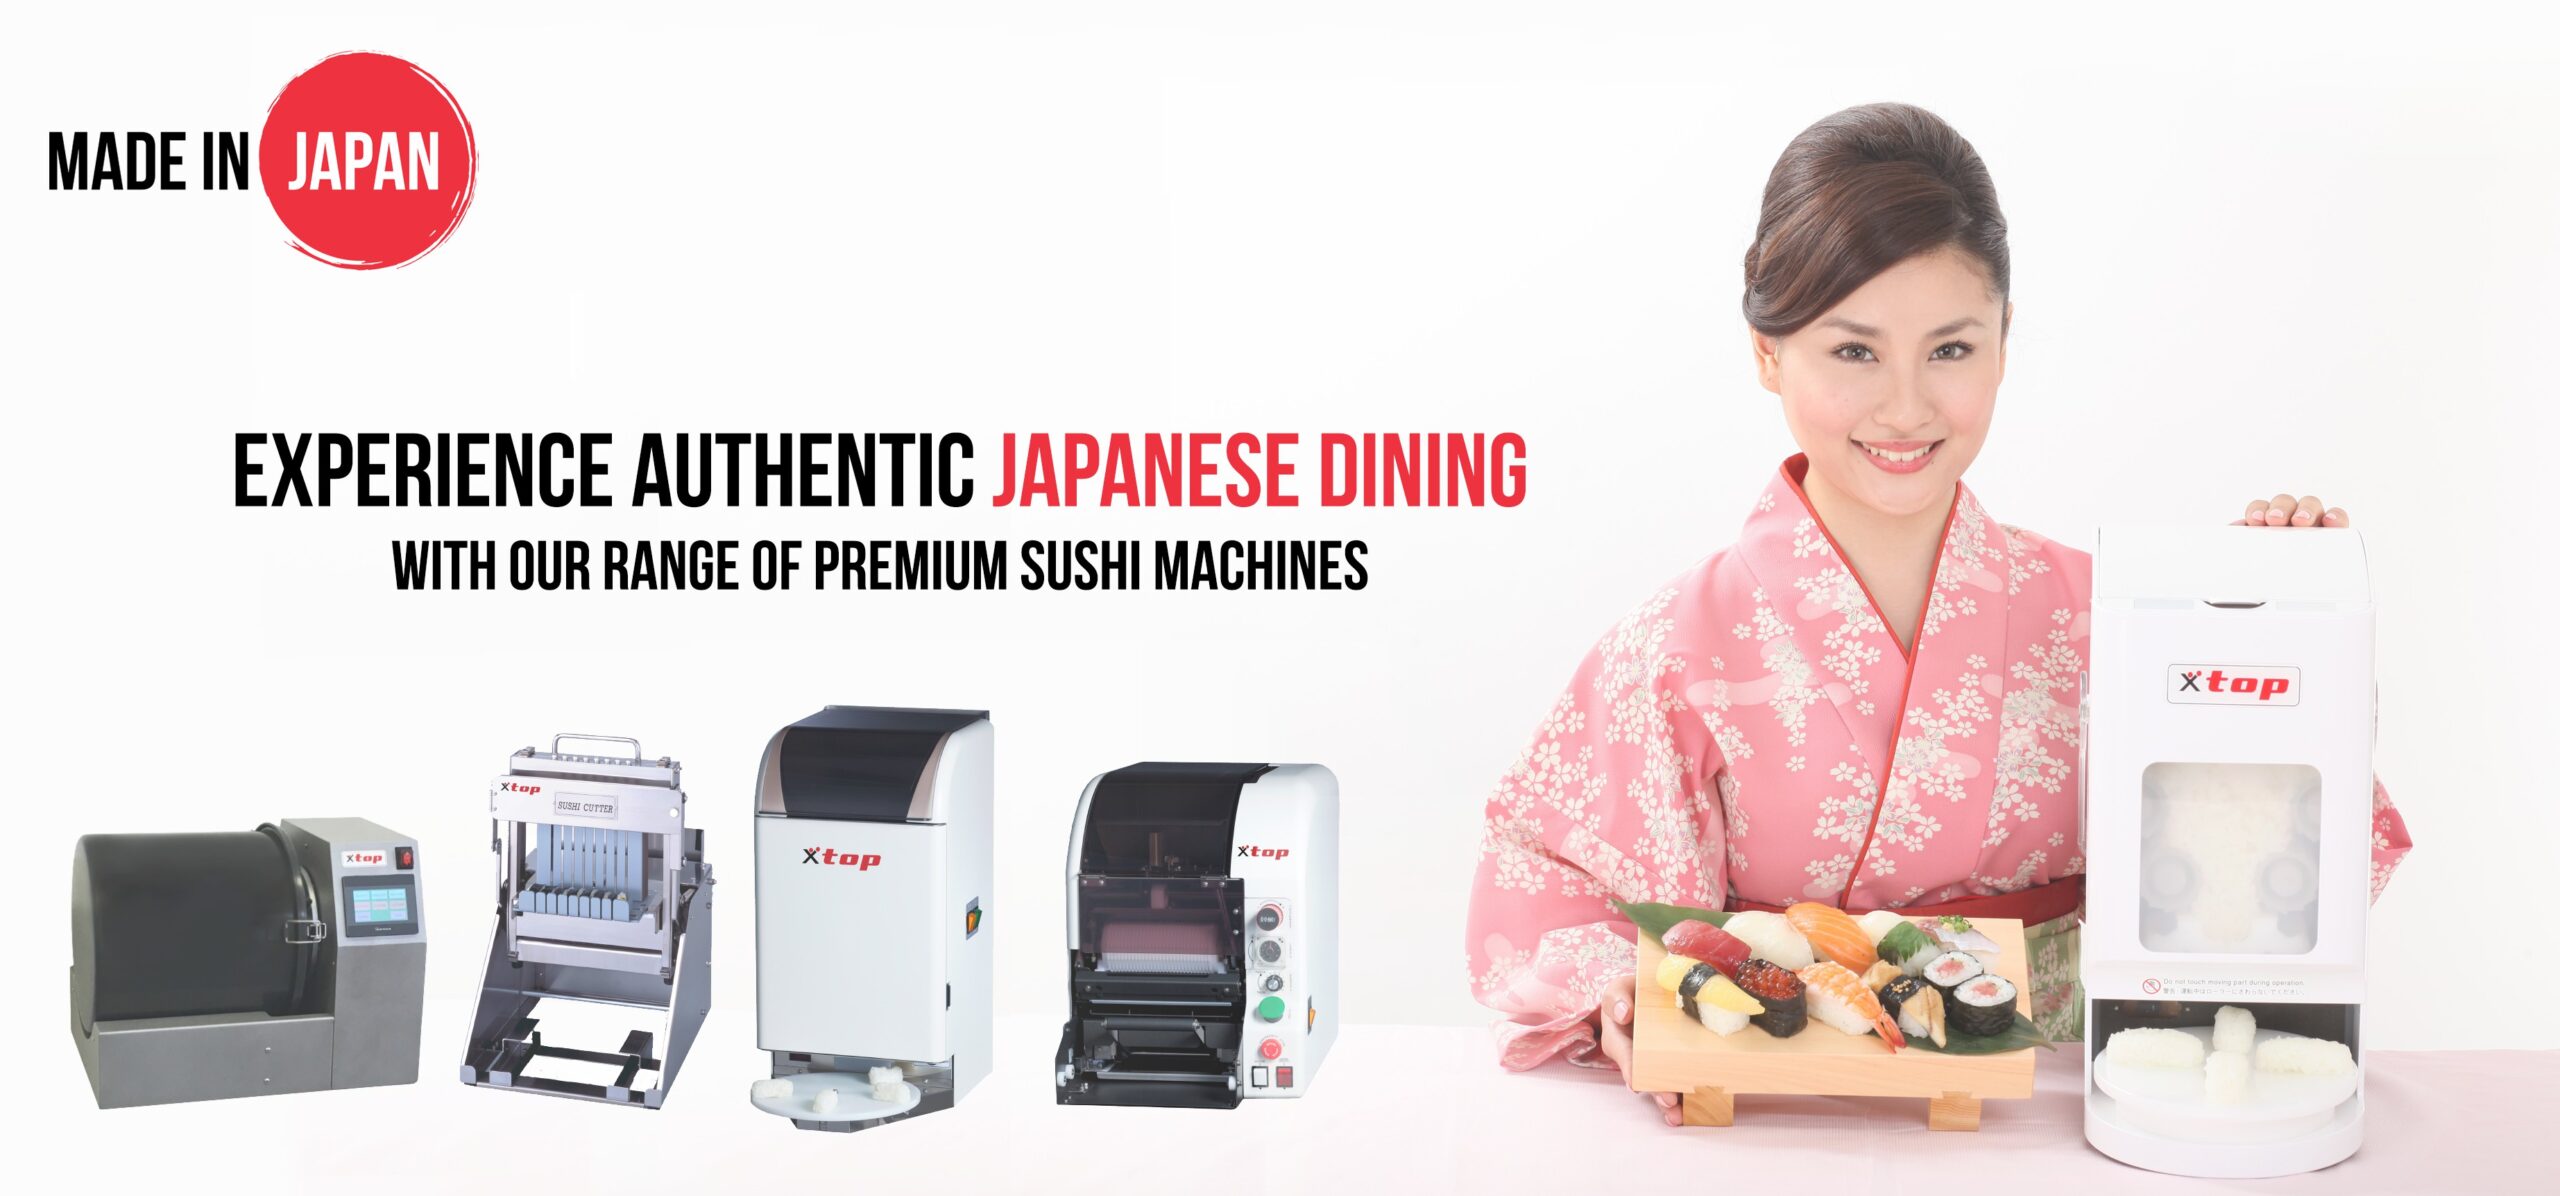 Chef finishing a plate of sushi made with sushi machines